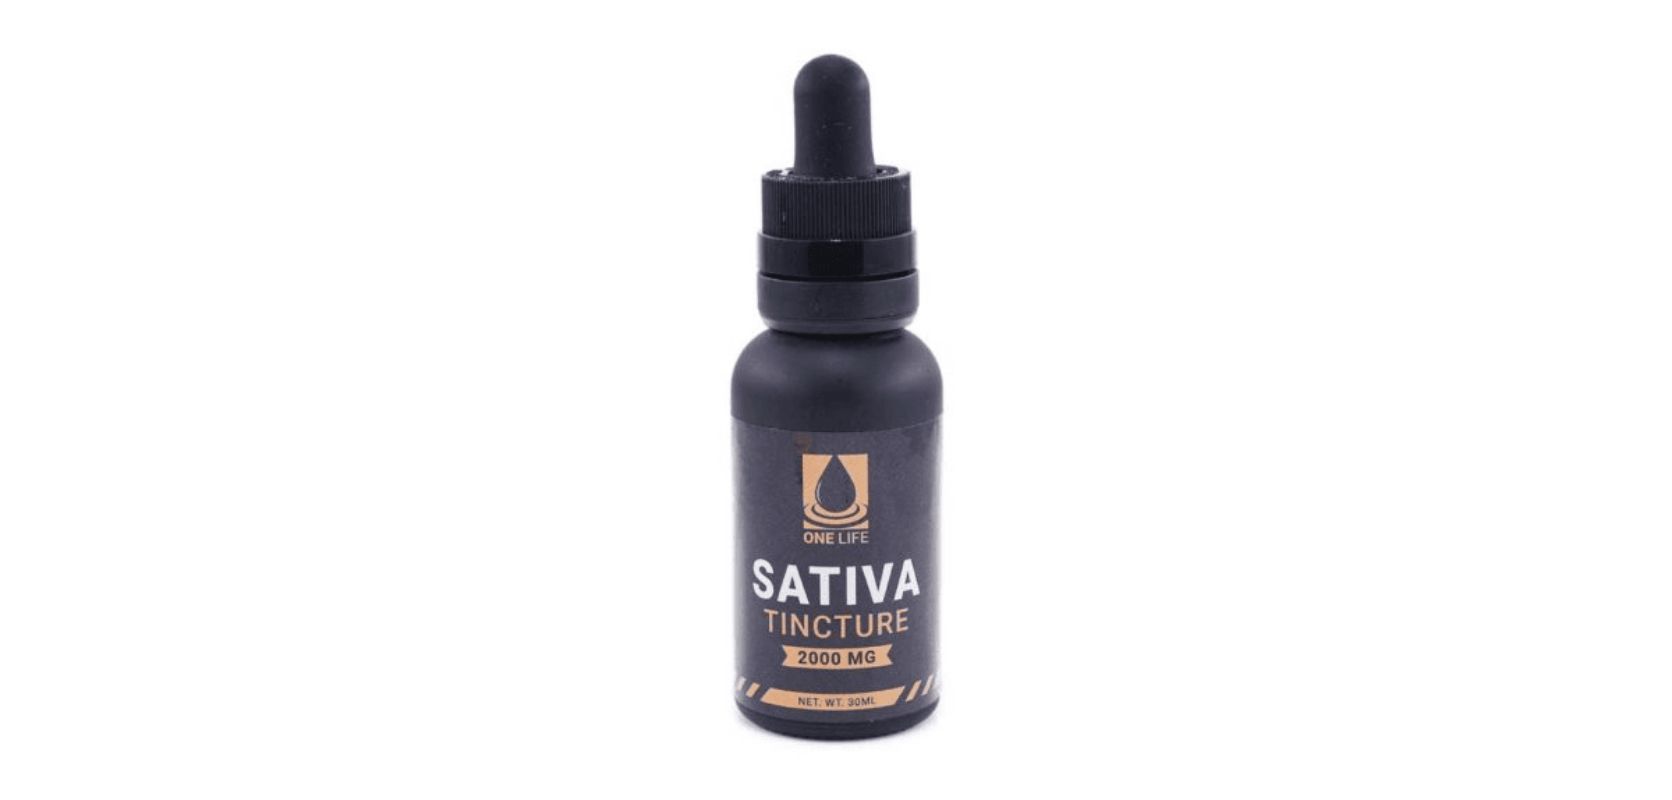 The Sativa Tincture - Distillate is among the most potent, carrying 2000mg THC. 